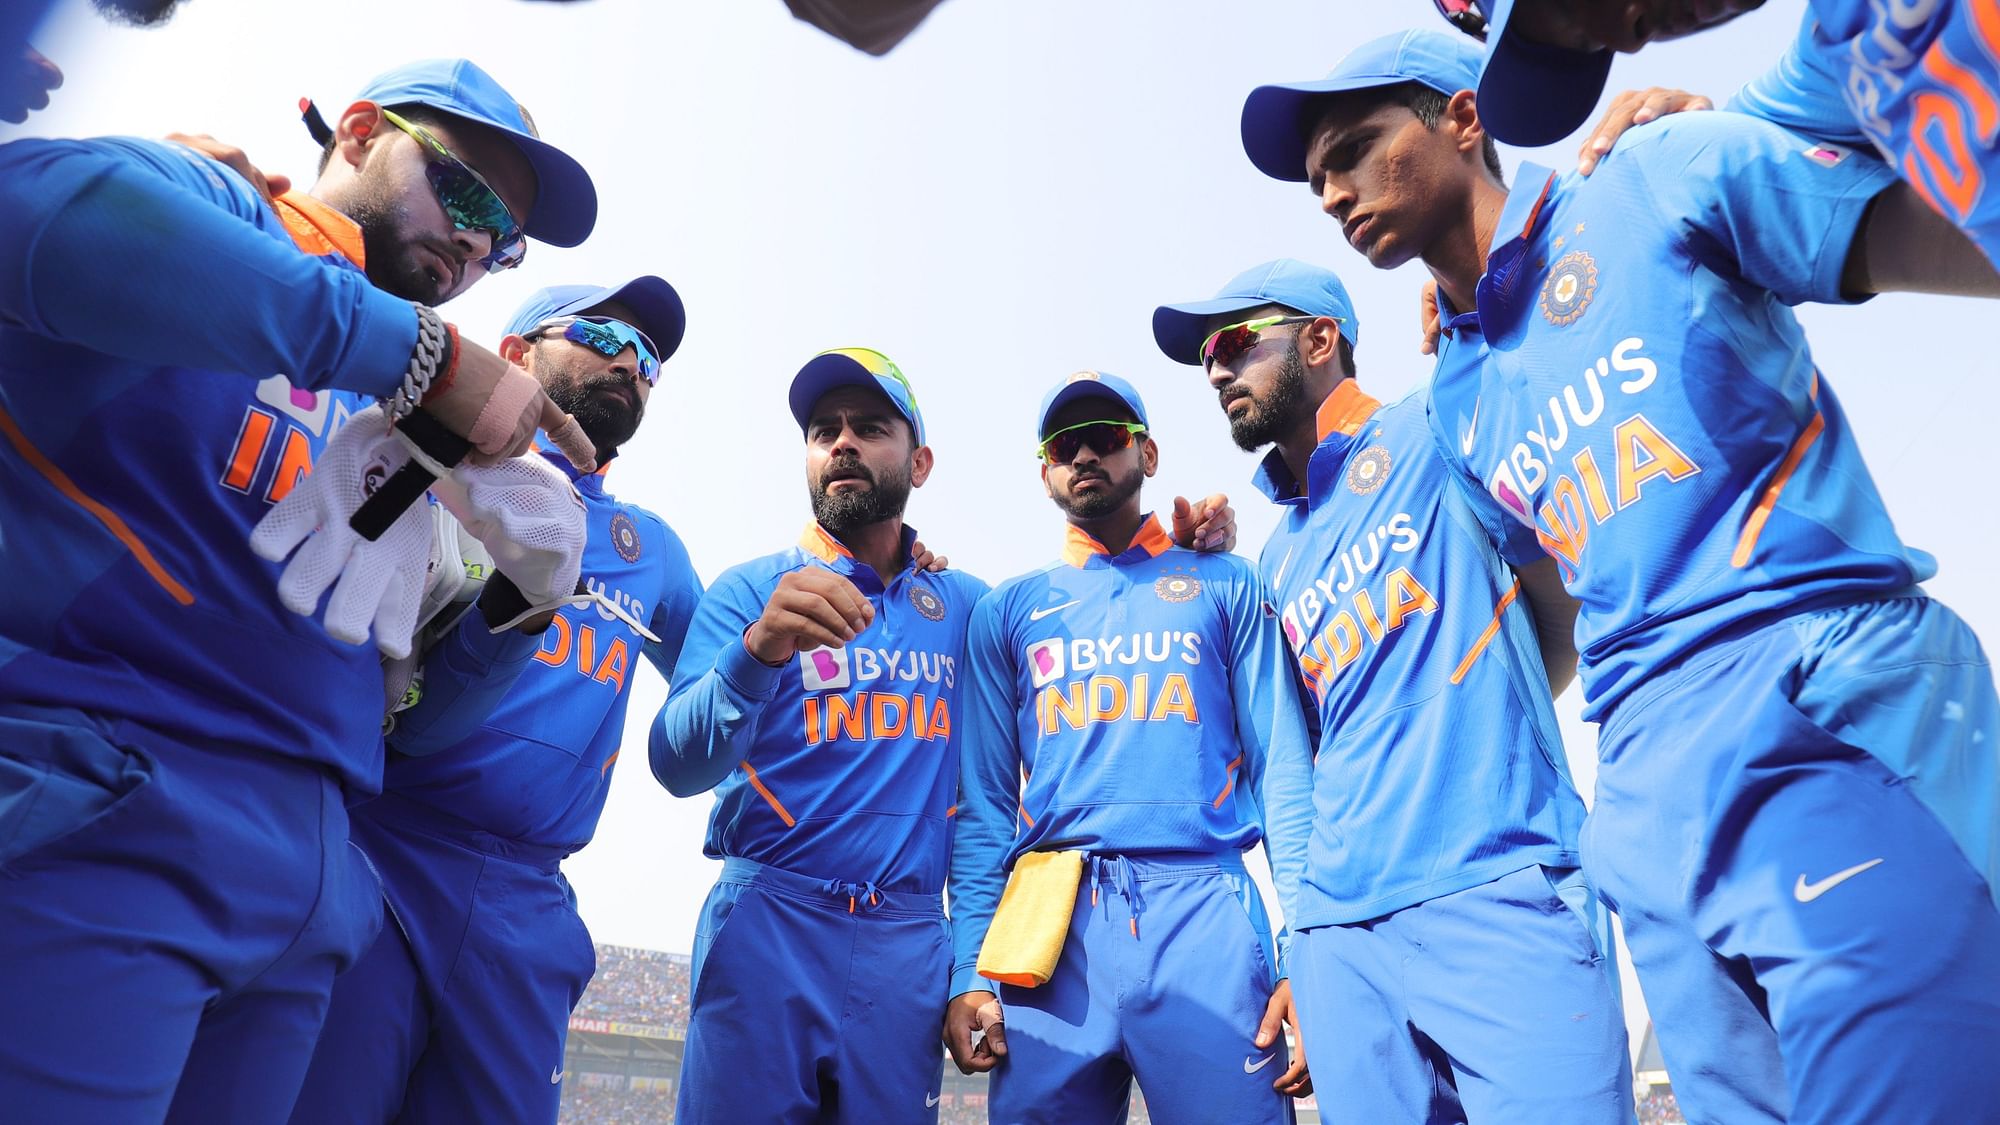 A BCCI official has said it looks almost impossible that the Indian team can travel to Sri Lanka in July.